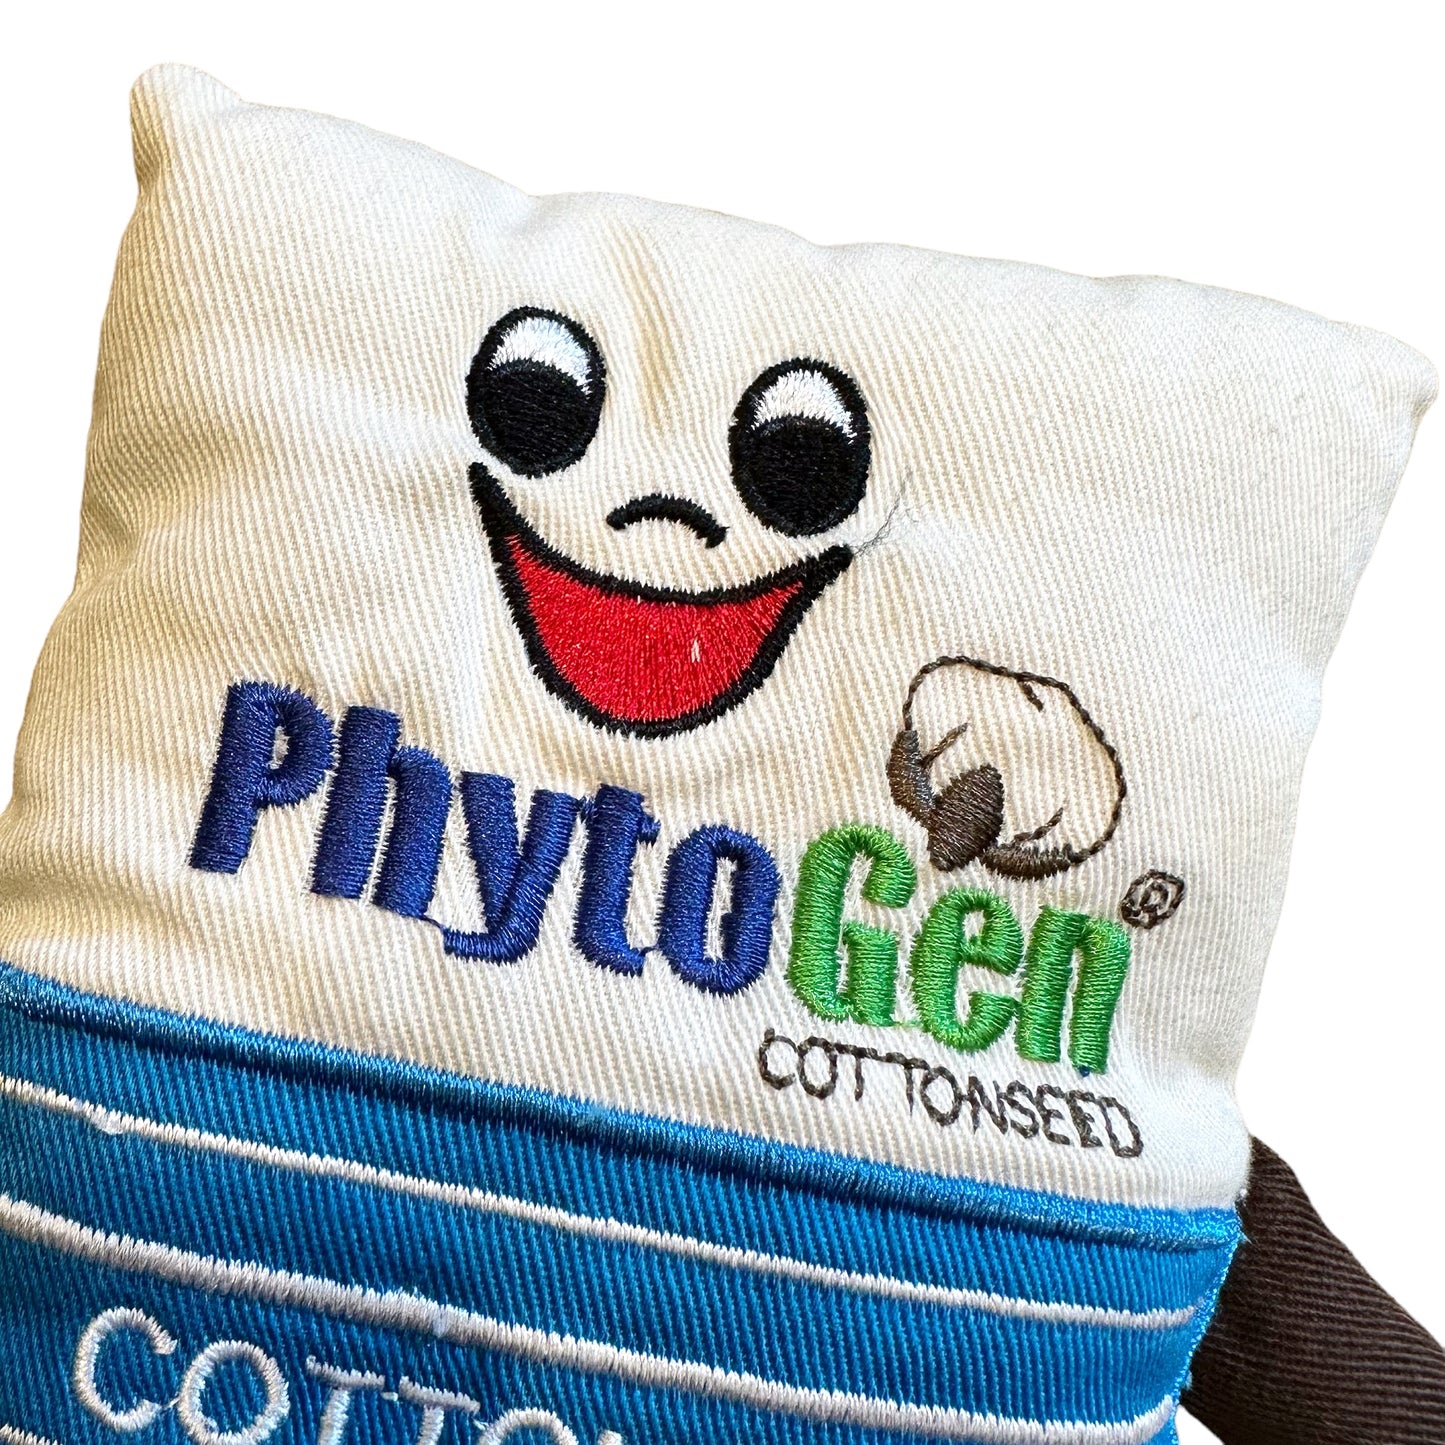 CURTO TOY phytogen cottonseed plush